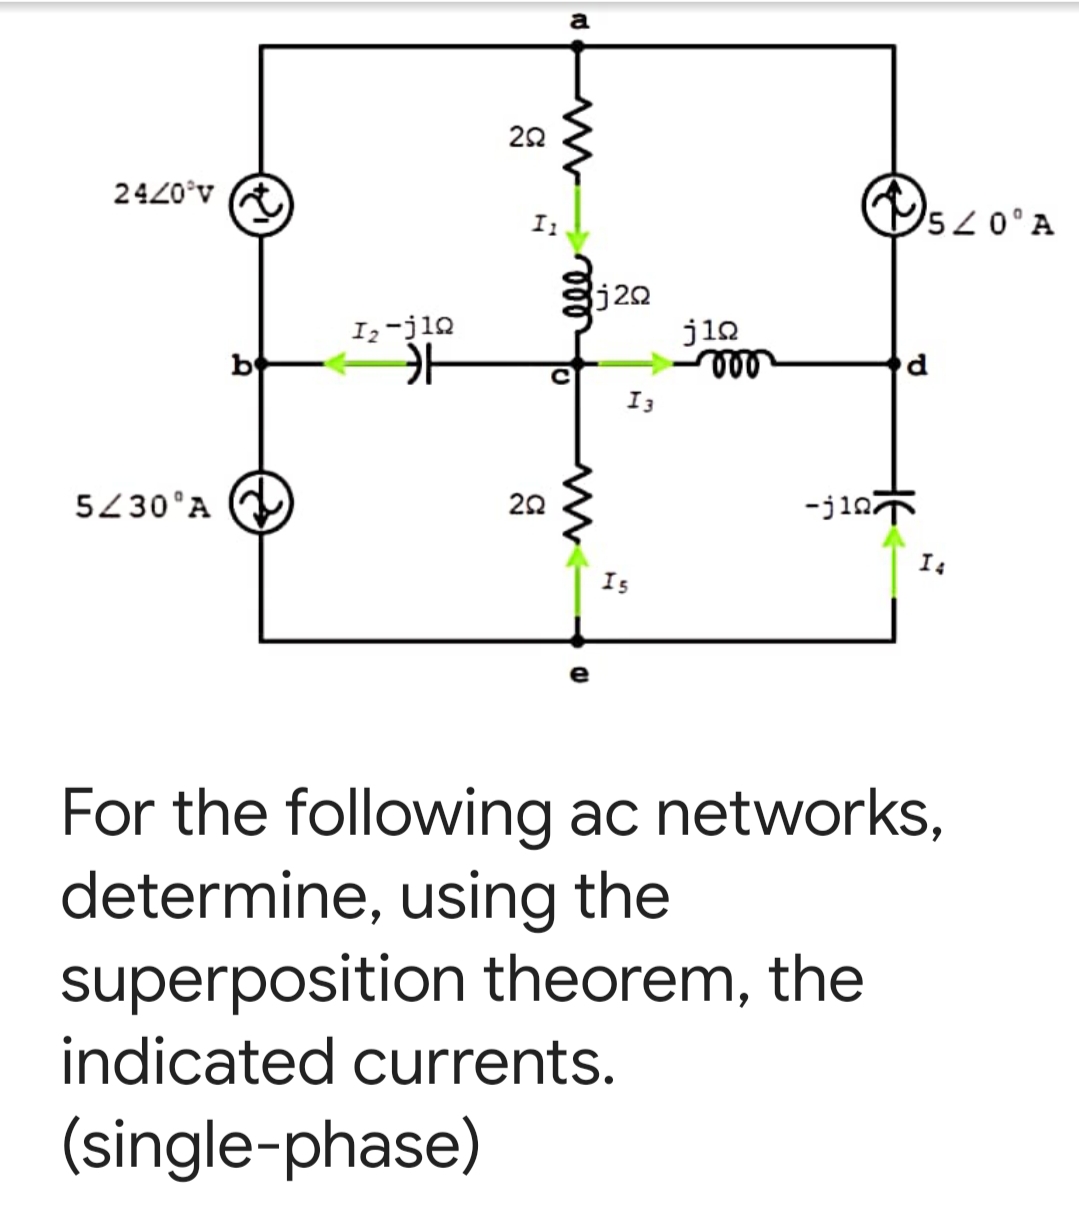 a
22
Os.
2420°v
I1
50°A
j20
j12
le
I2-j10
b
I3
5230°A
20
-jin
I4
Is
For the following ac networks,
determine, using the
superposition theorem, the
indicated currents.
(single-phase)
ll
